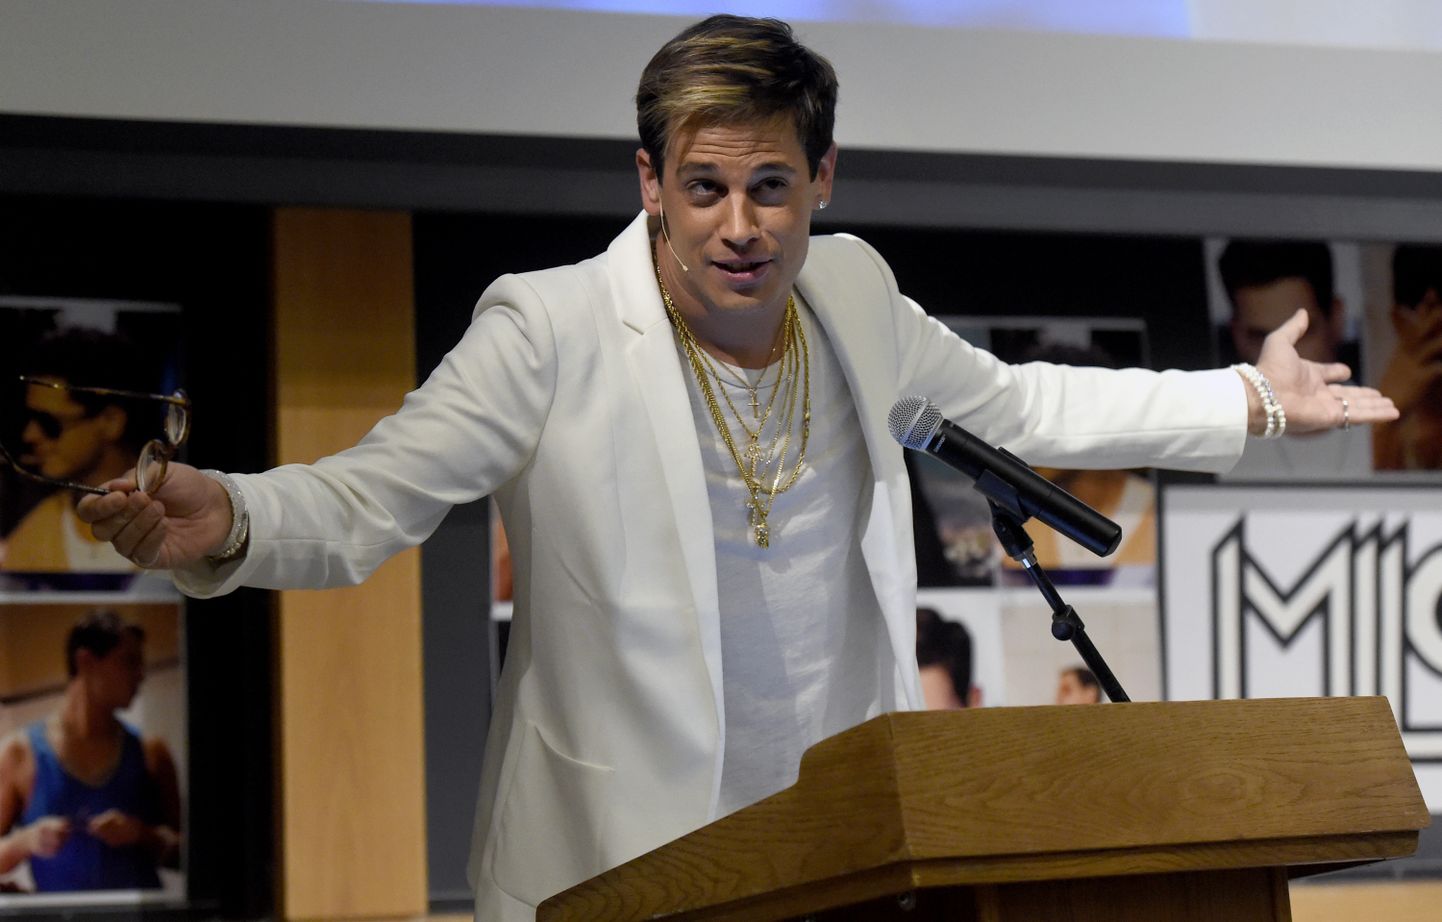 Milo Yiannopoulos.